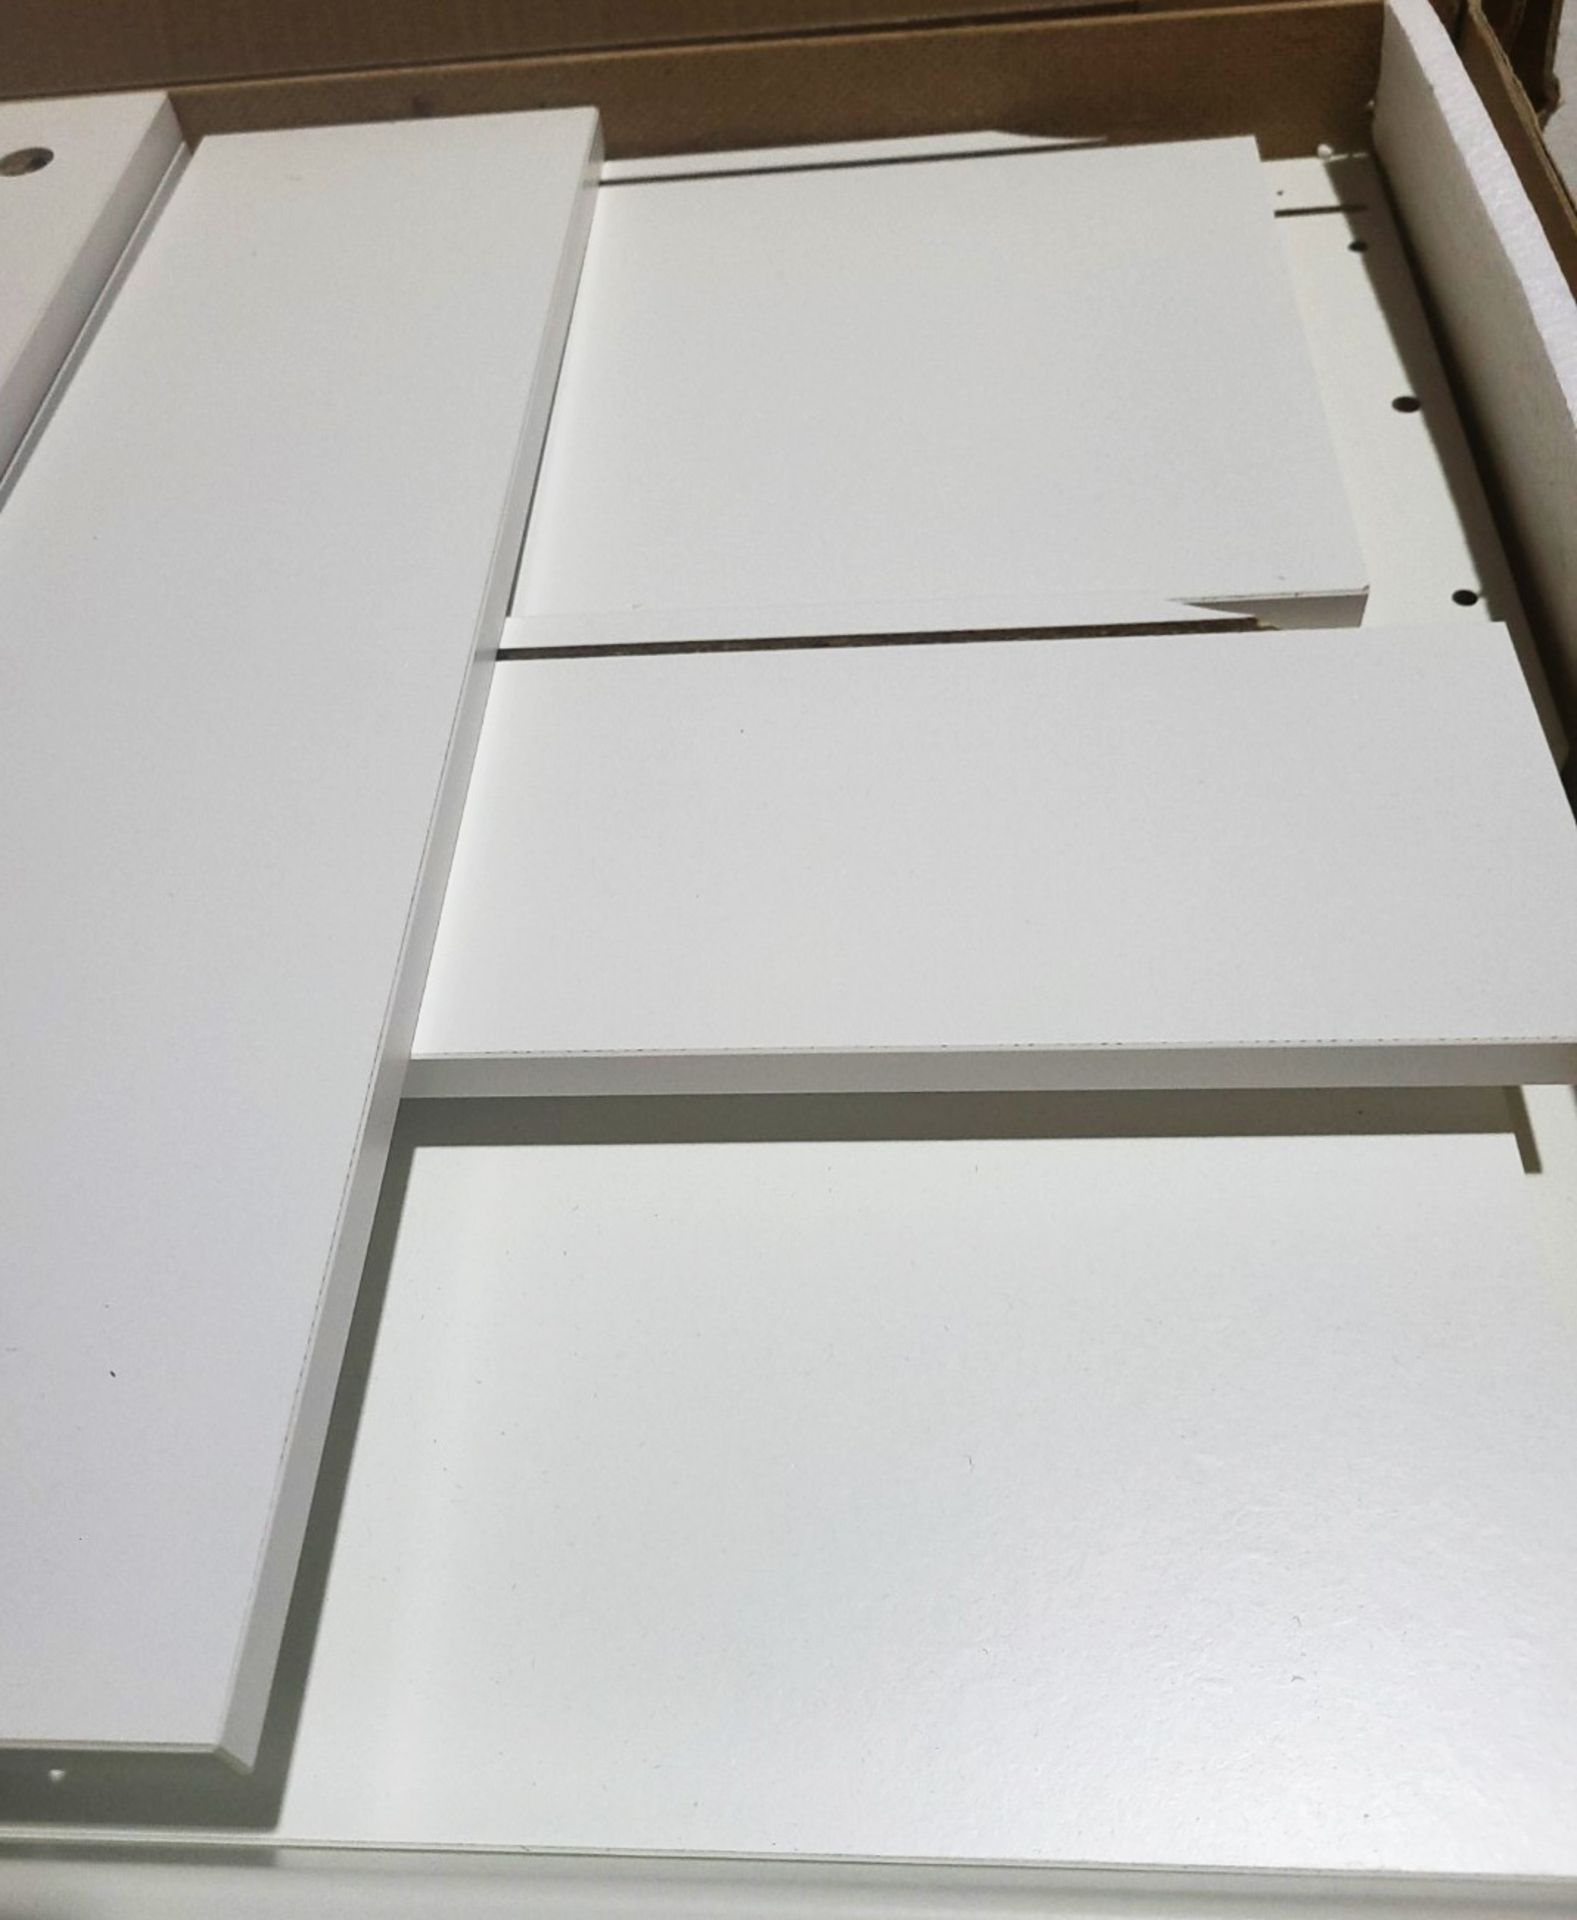 1 x STOKKE White Three Drawer Beechwood And MDF Home Dresser *Comes In 2 Boxes - Image 4 of 5